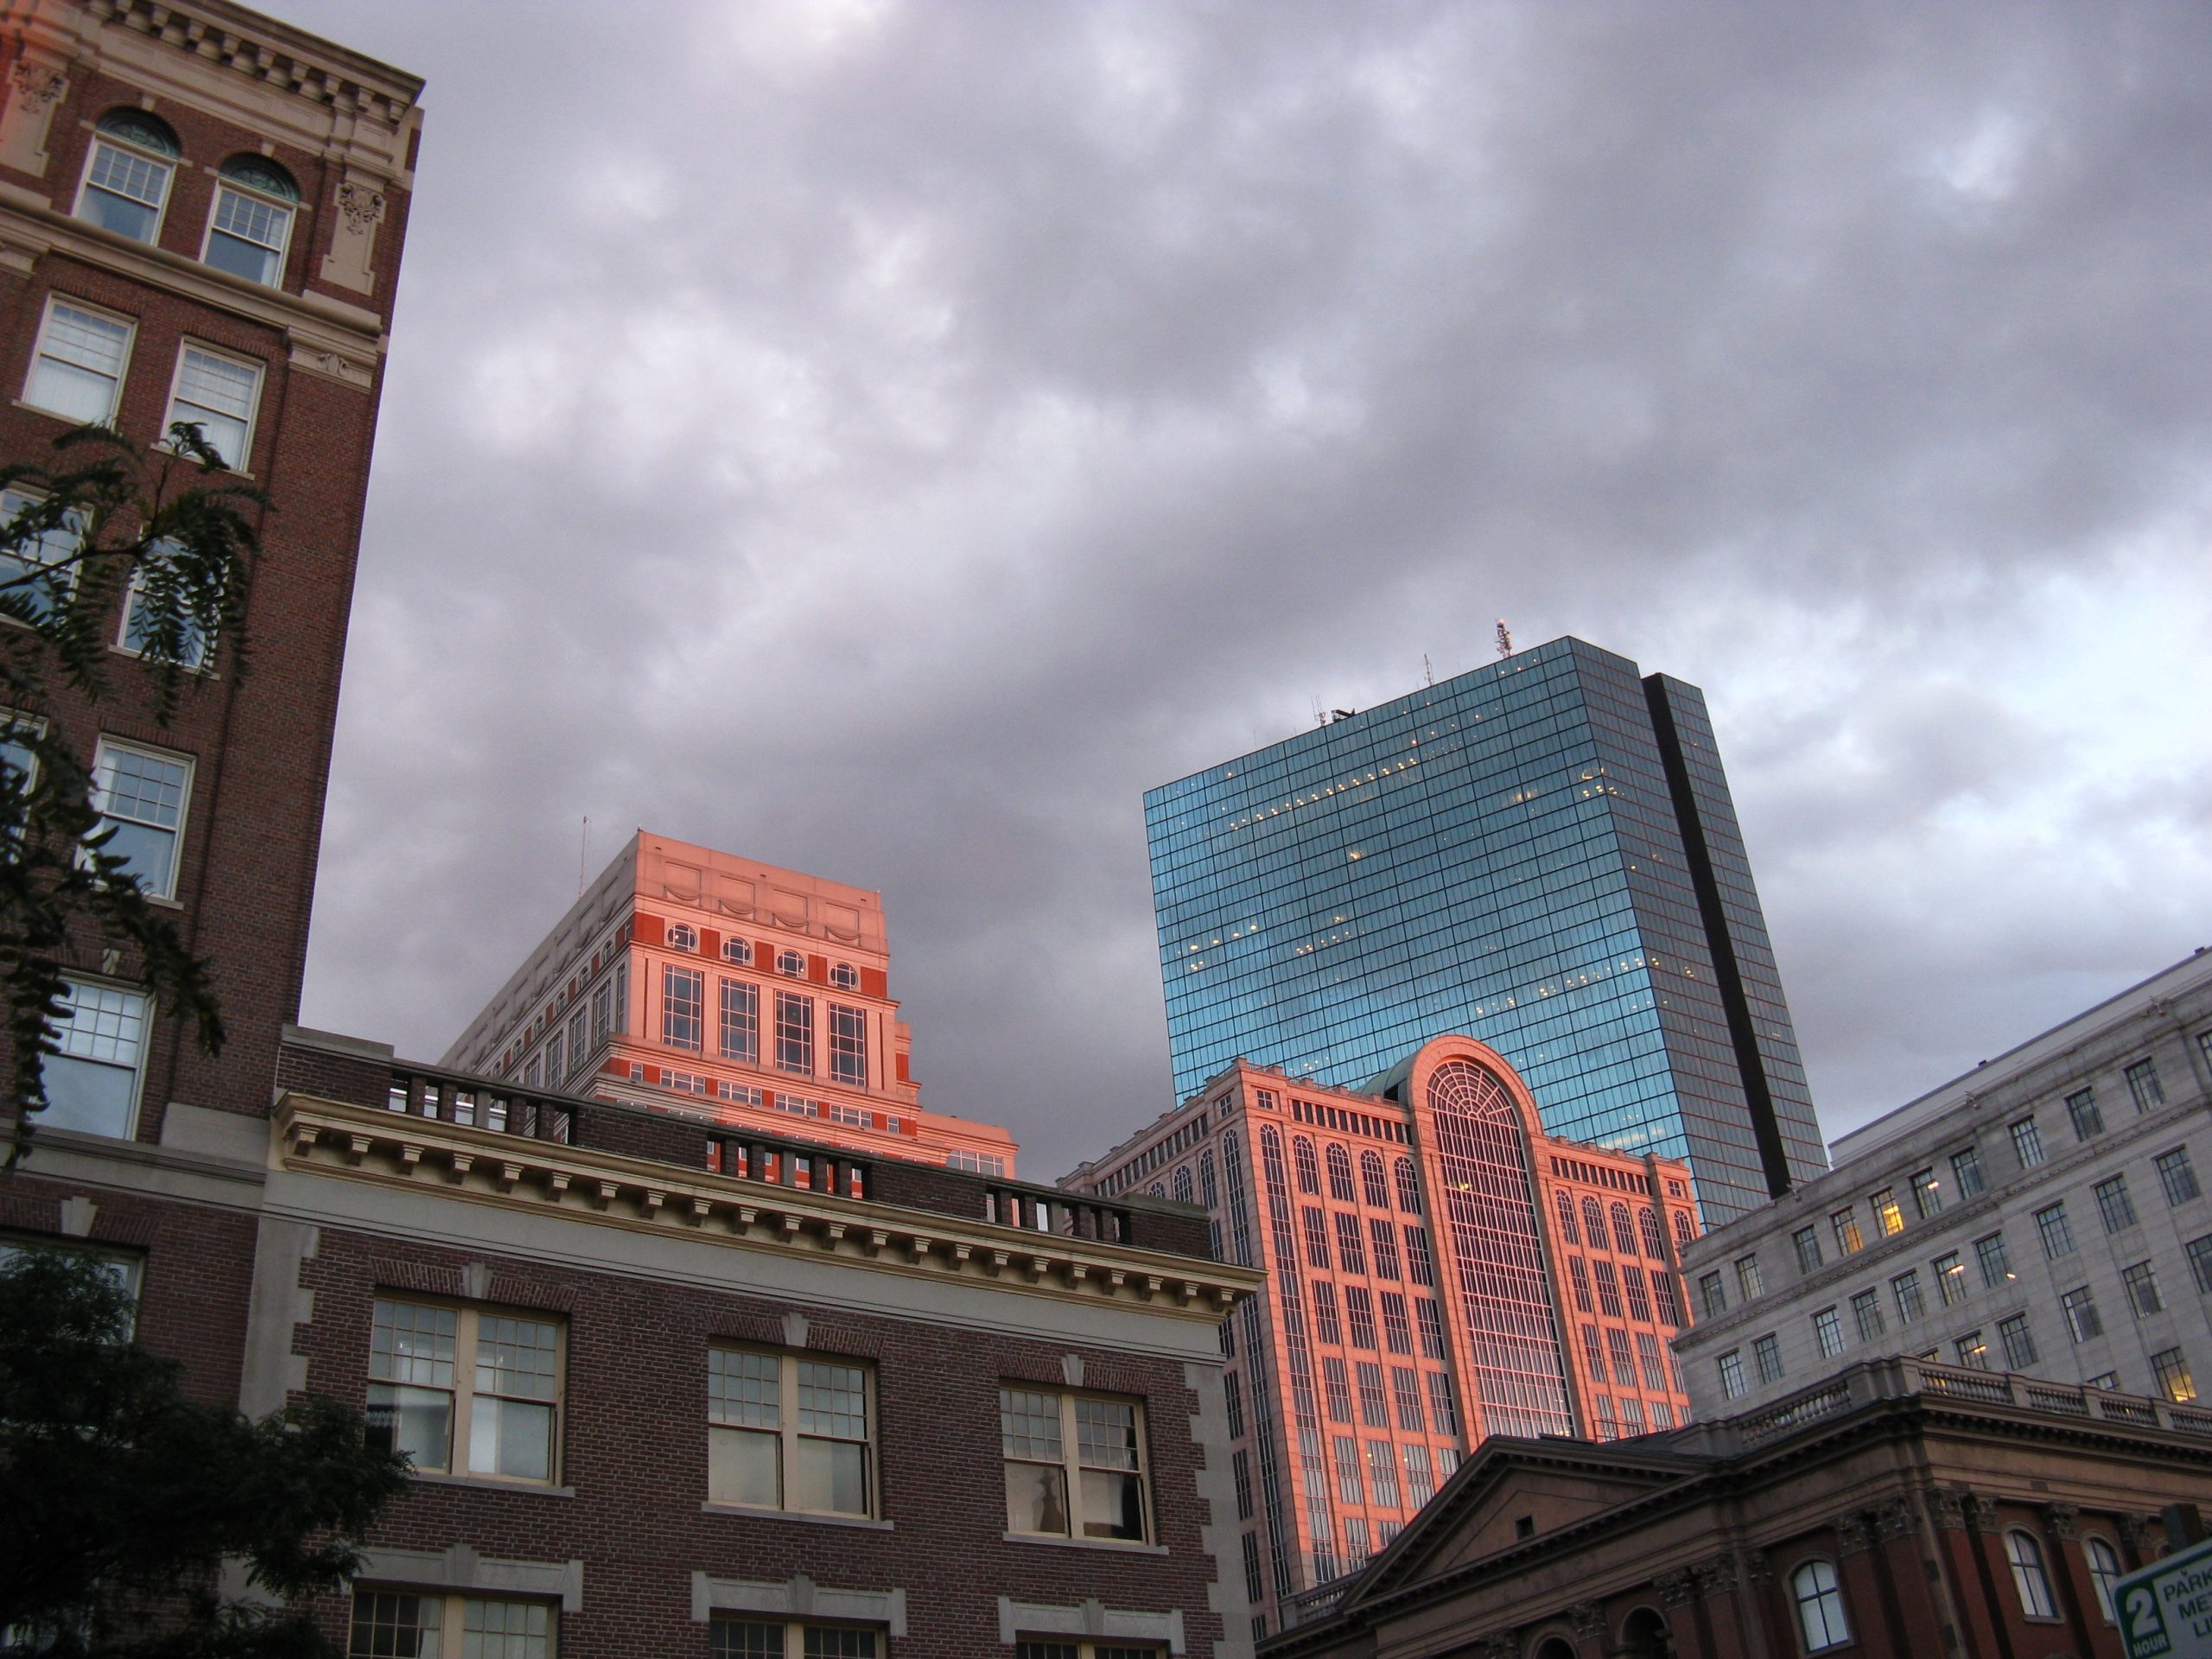 Boston Buildings Just Before Sunset (user submitted)